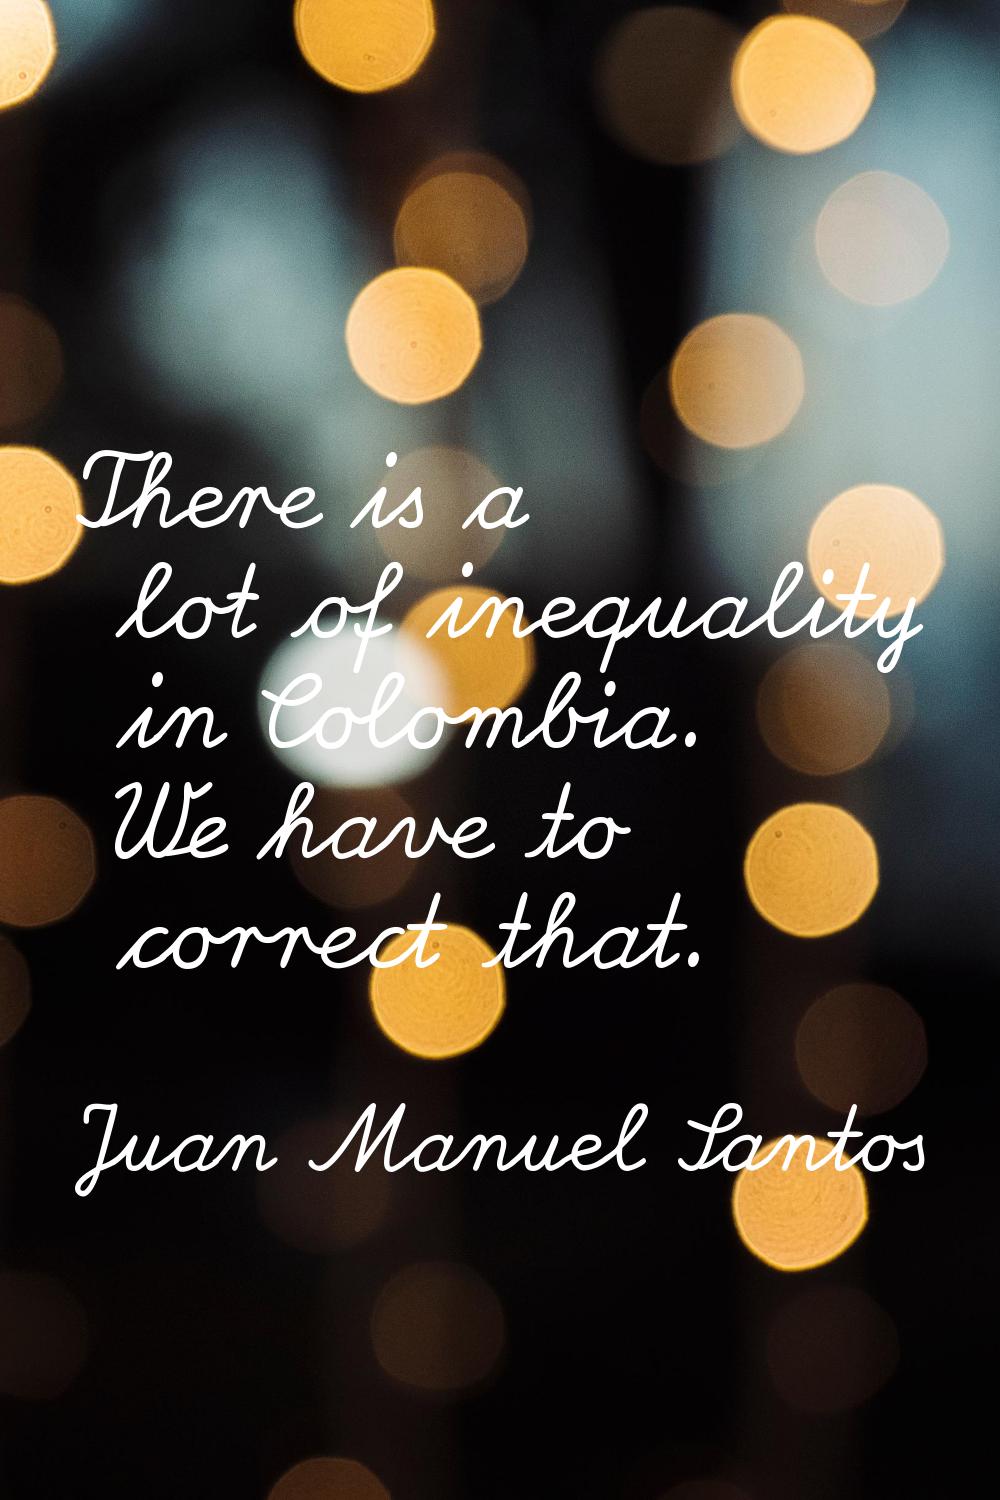 There is a lot of inequality in Colombia. We have to correct that.